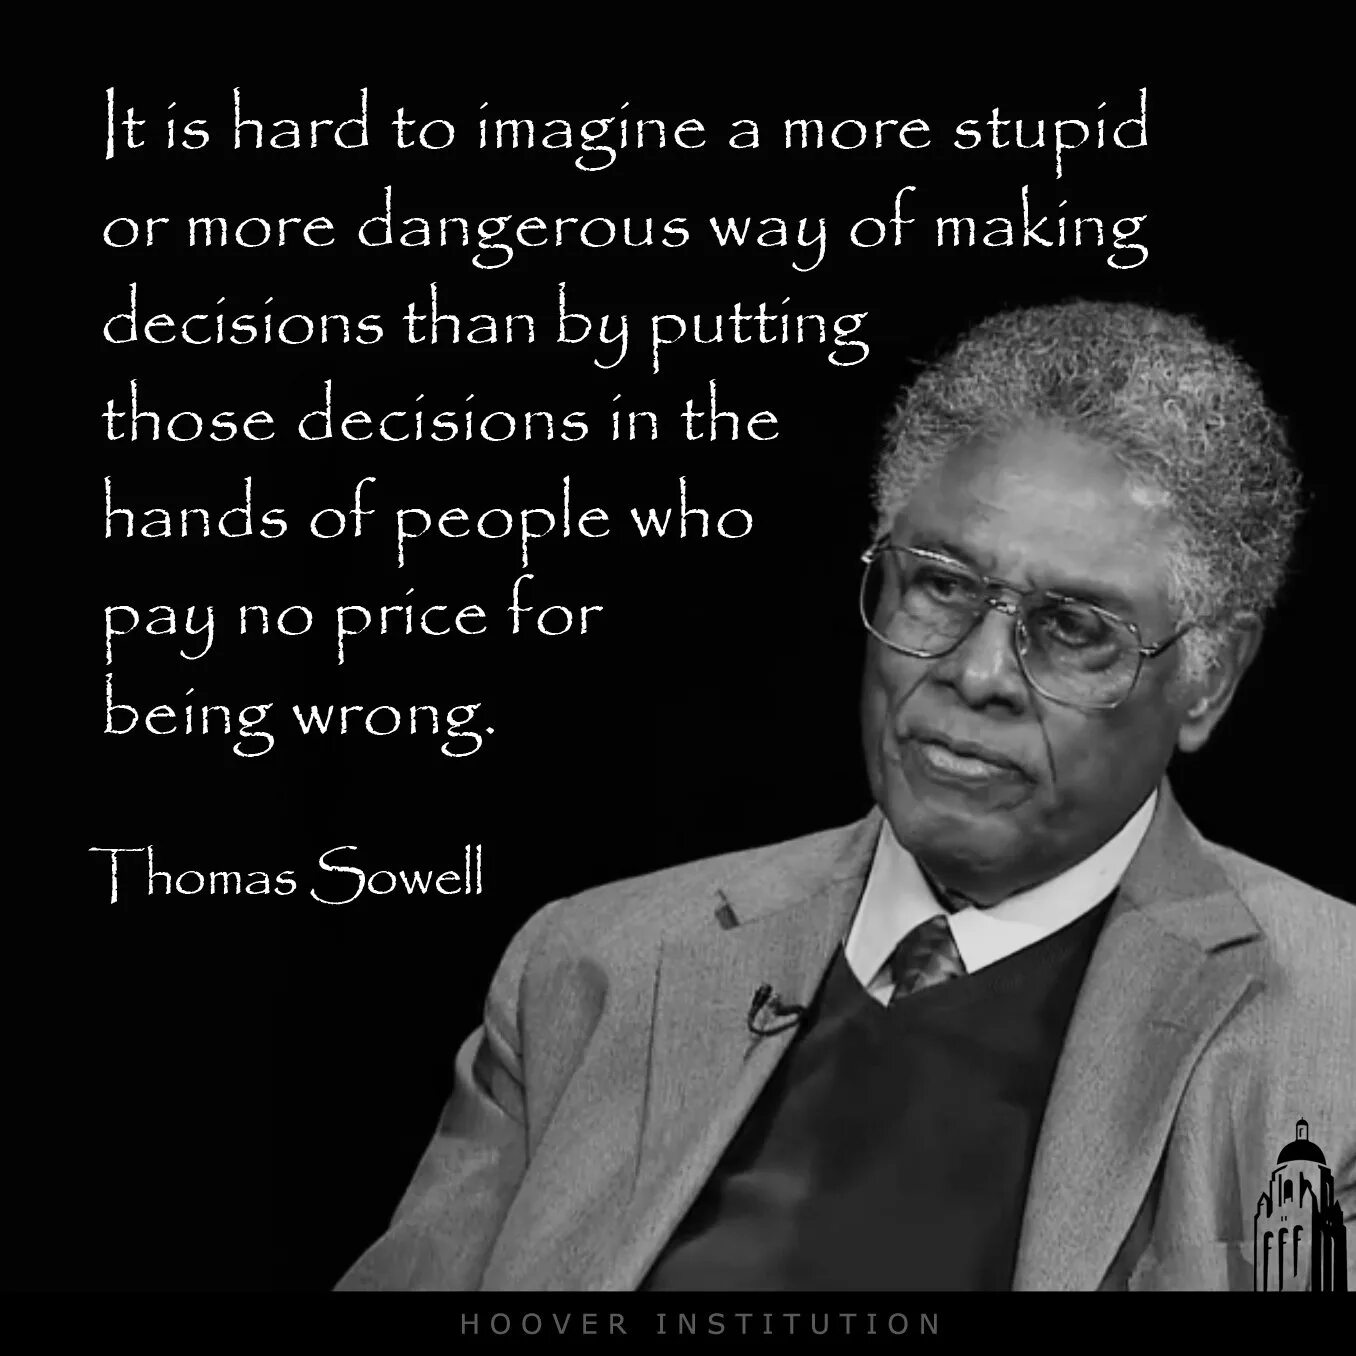 "Thomas Sowell quotes". Thomas Sowell photograph. Rothbard Sowell. Thomas Sowell intellectuals and Society на русском. Greedy that you want me